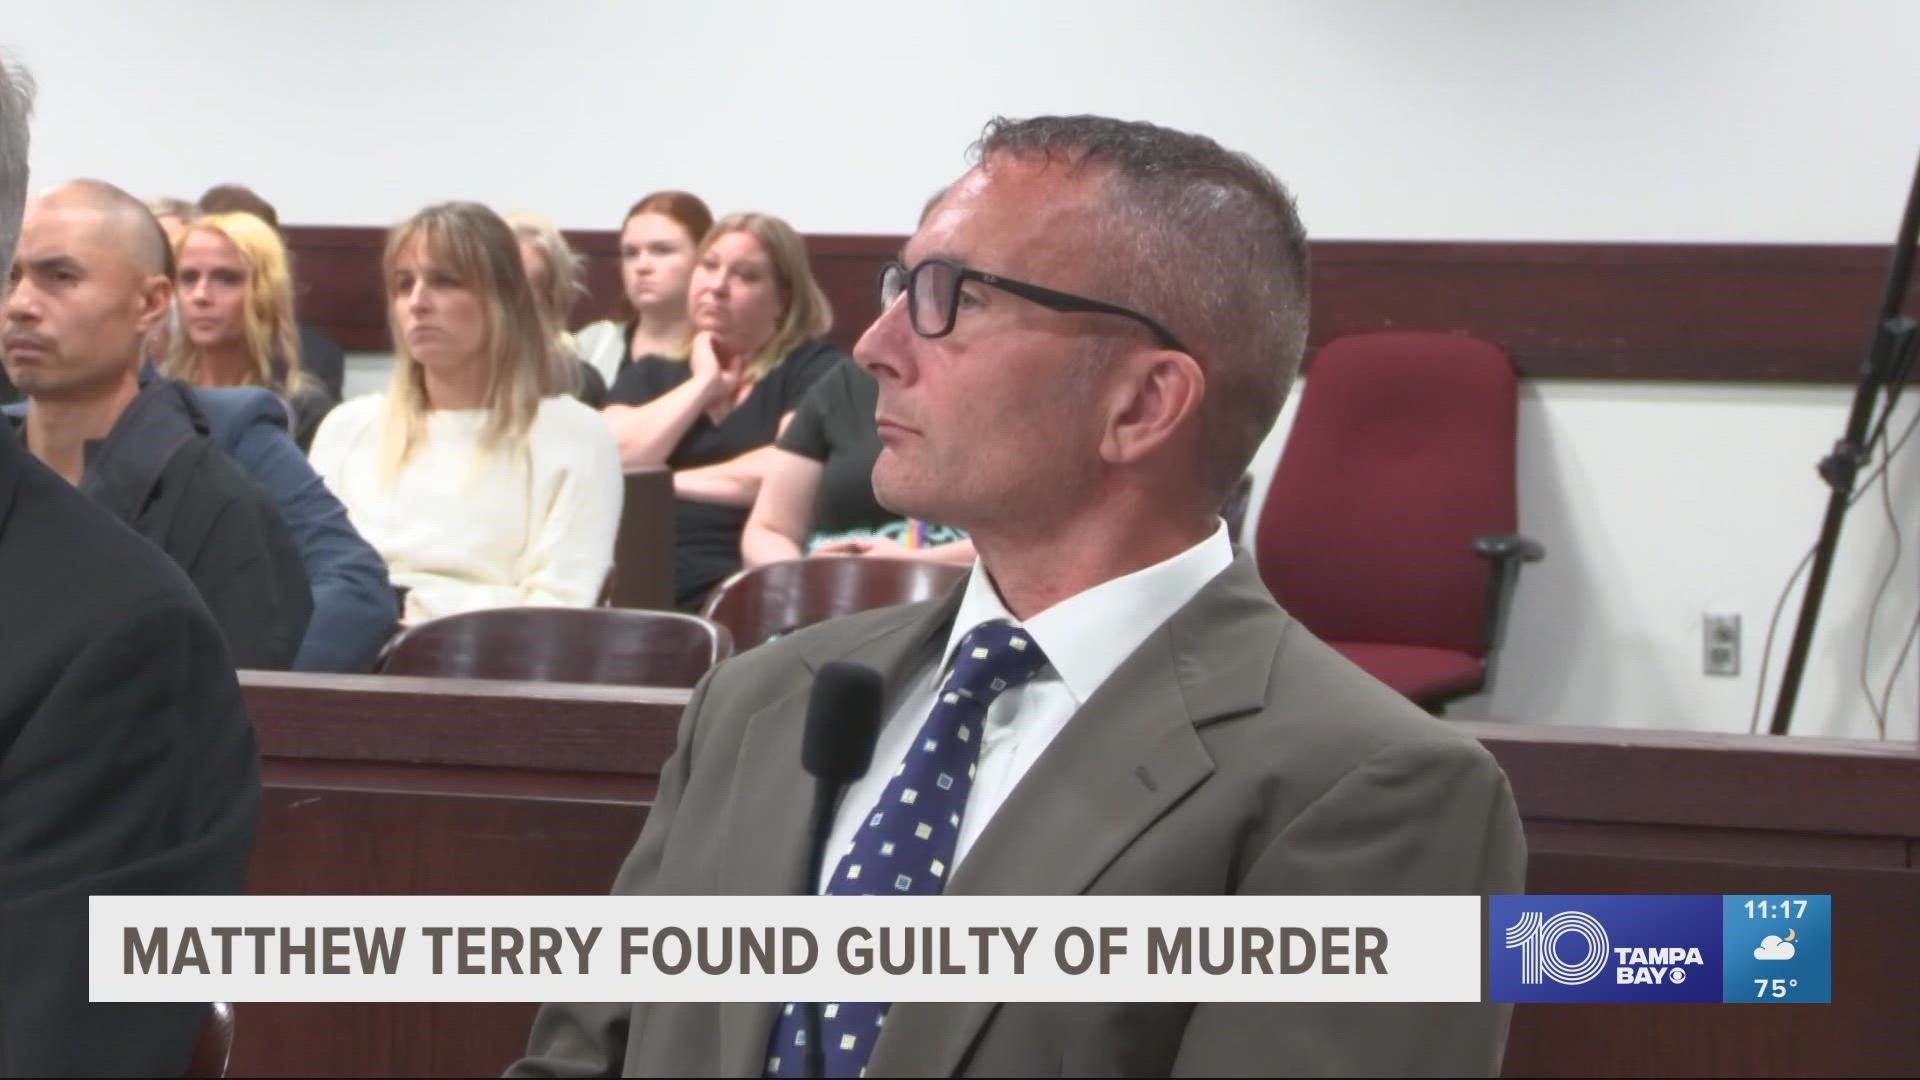 Both sides rested their case Tuesday, with Terry’s defense team calling no witnesses and then prosecutors and the defense presenting final arguments.